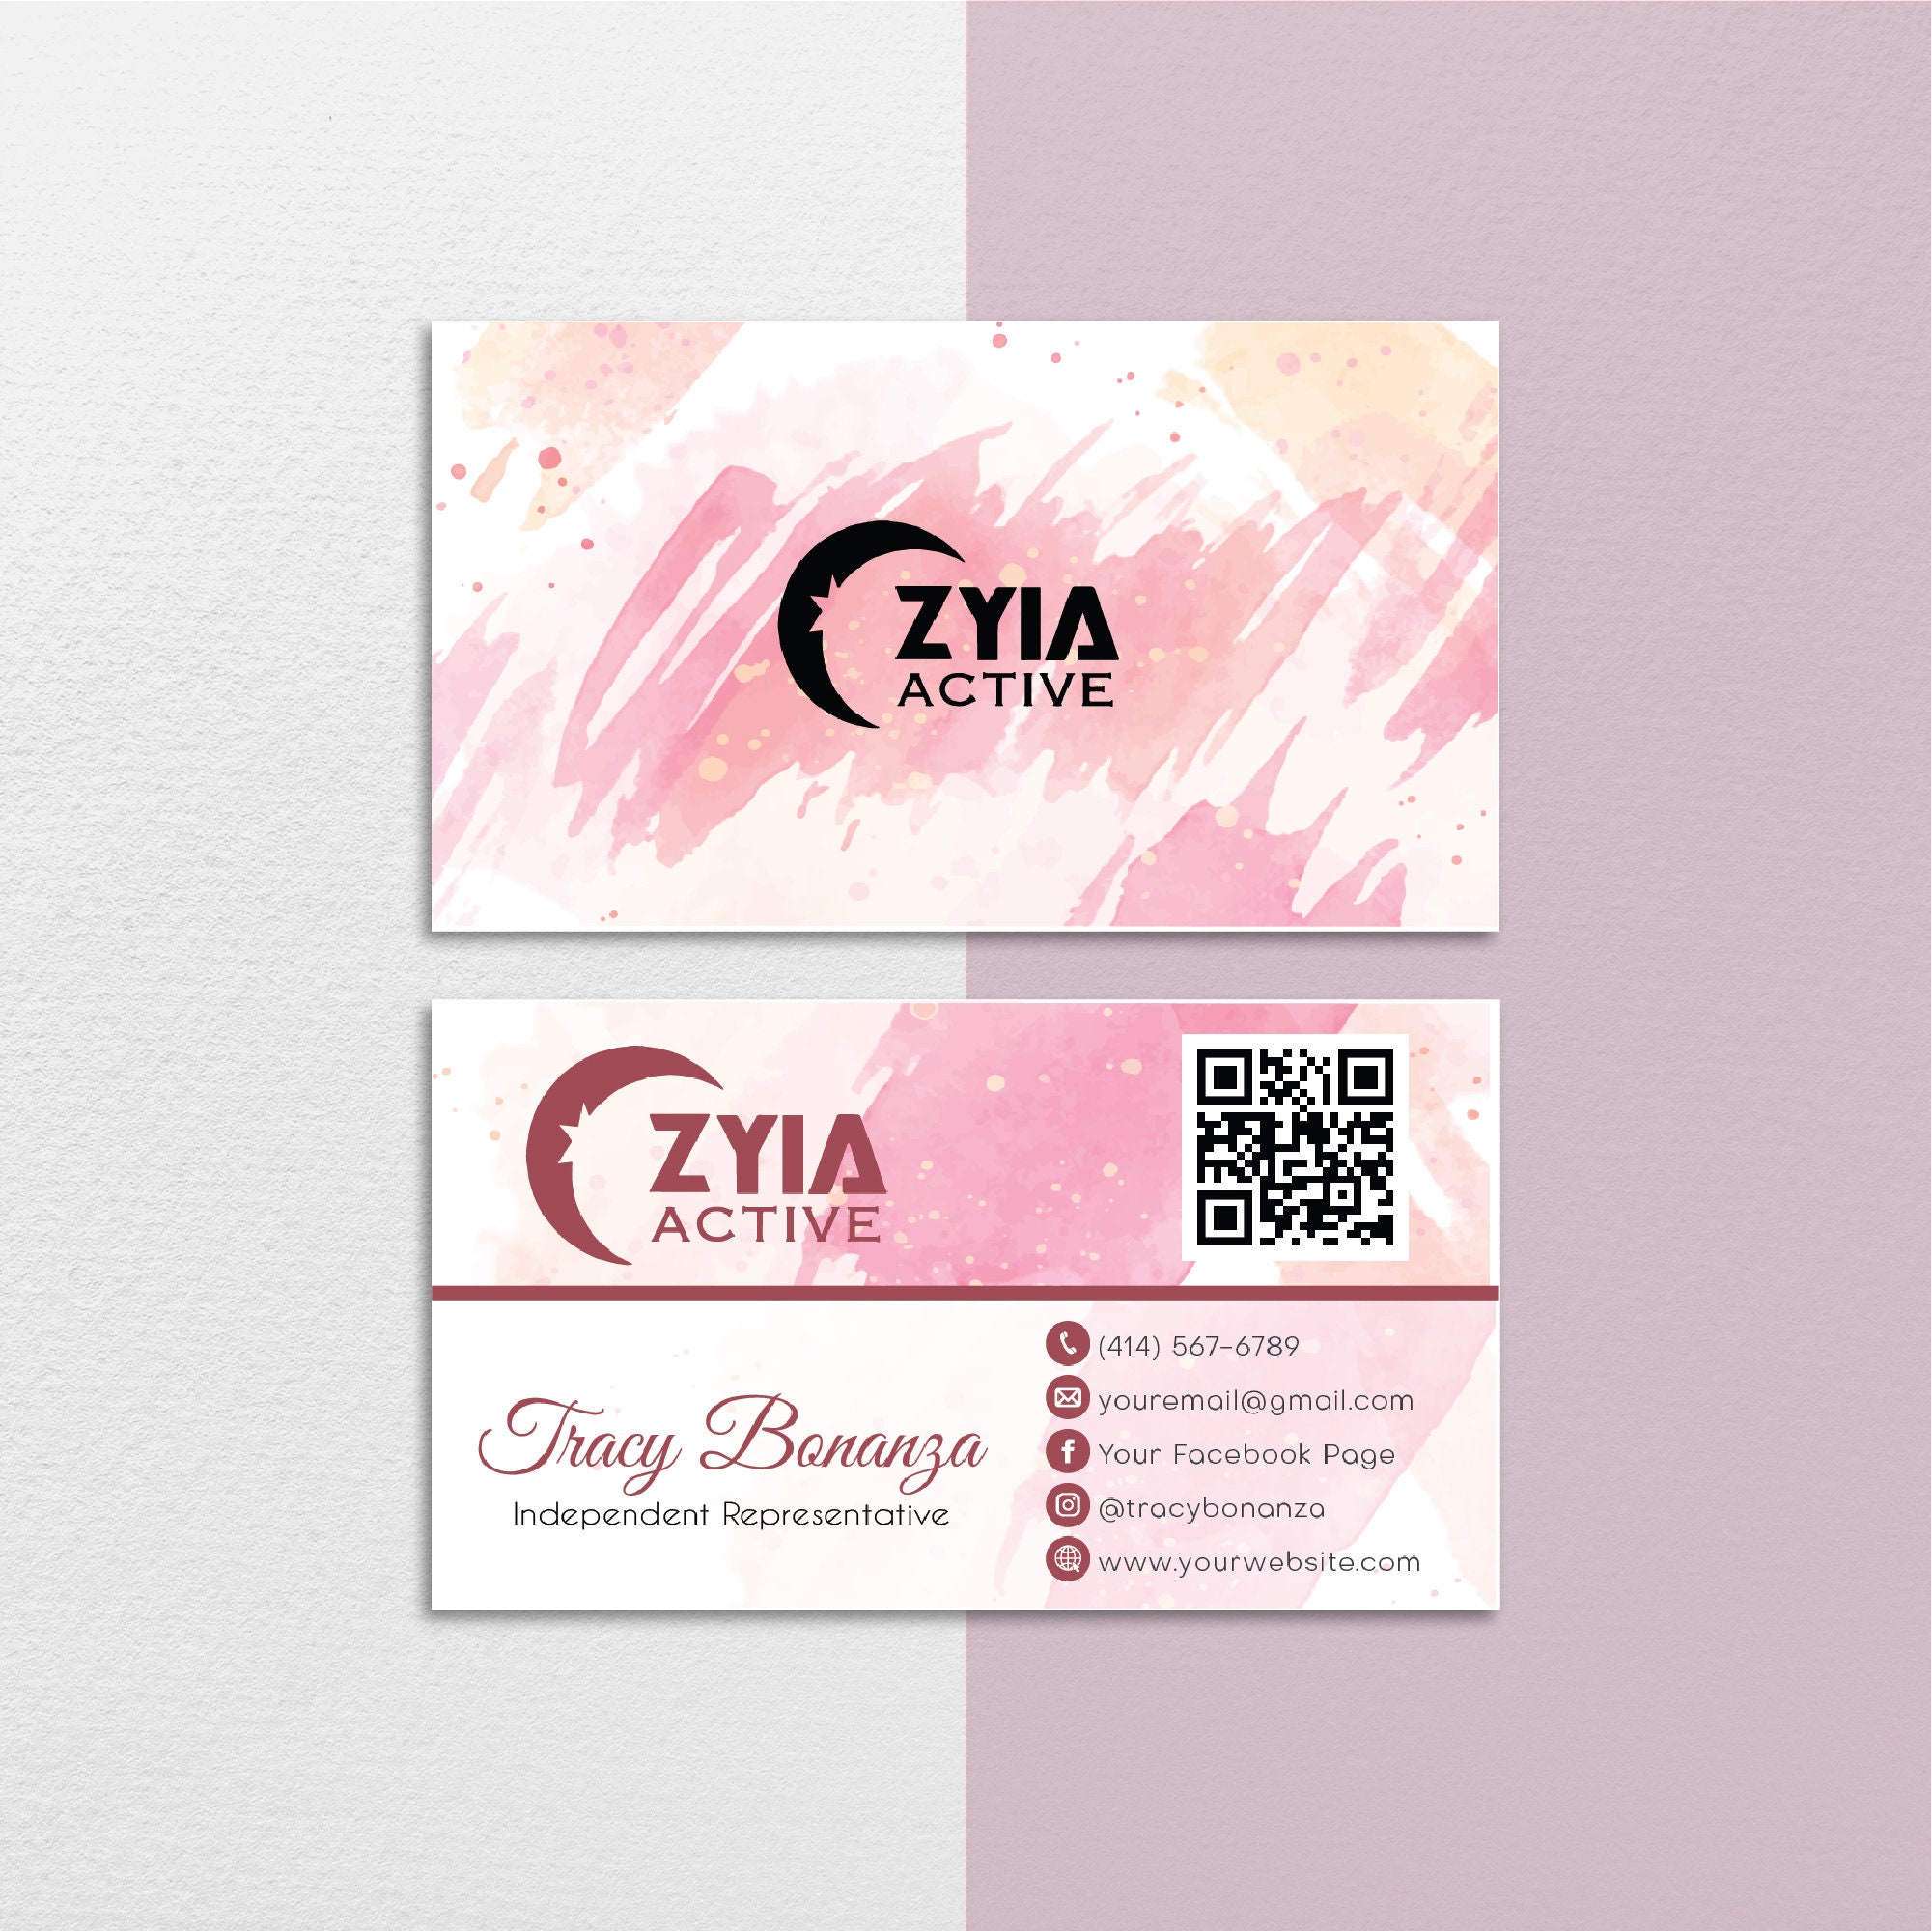 ZYIA Business Cards, Personalized Business Card QR Code, ZYIA Active Card,  Printable Busines Cards, Zyia Template Design, Digital File, ZA14 